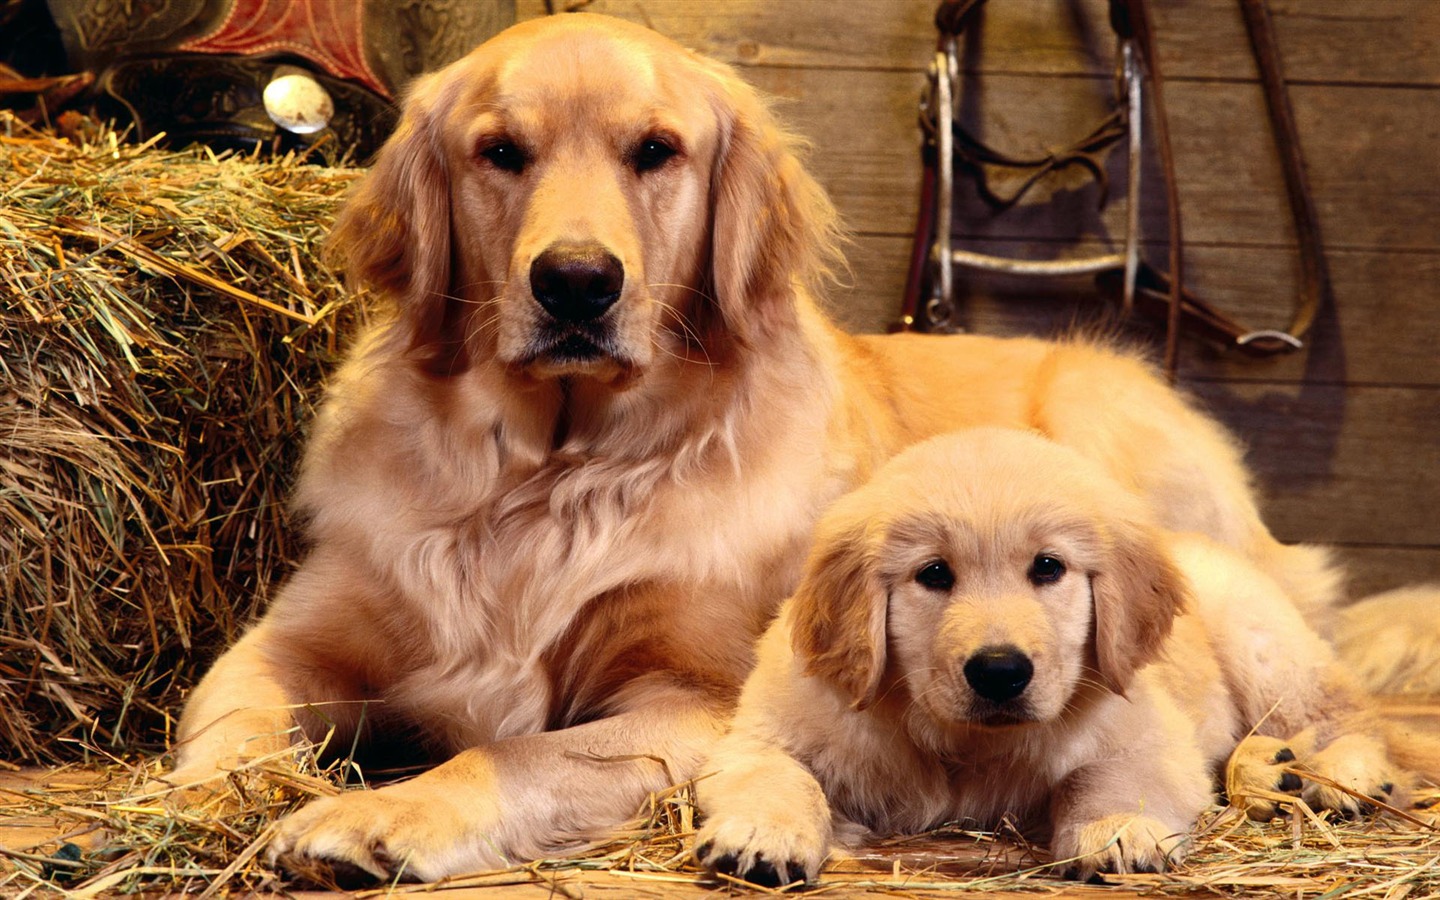 Puppy Photo HD wallpapers (2) #5 - 1440x900